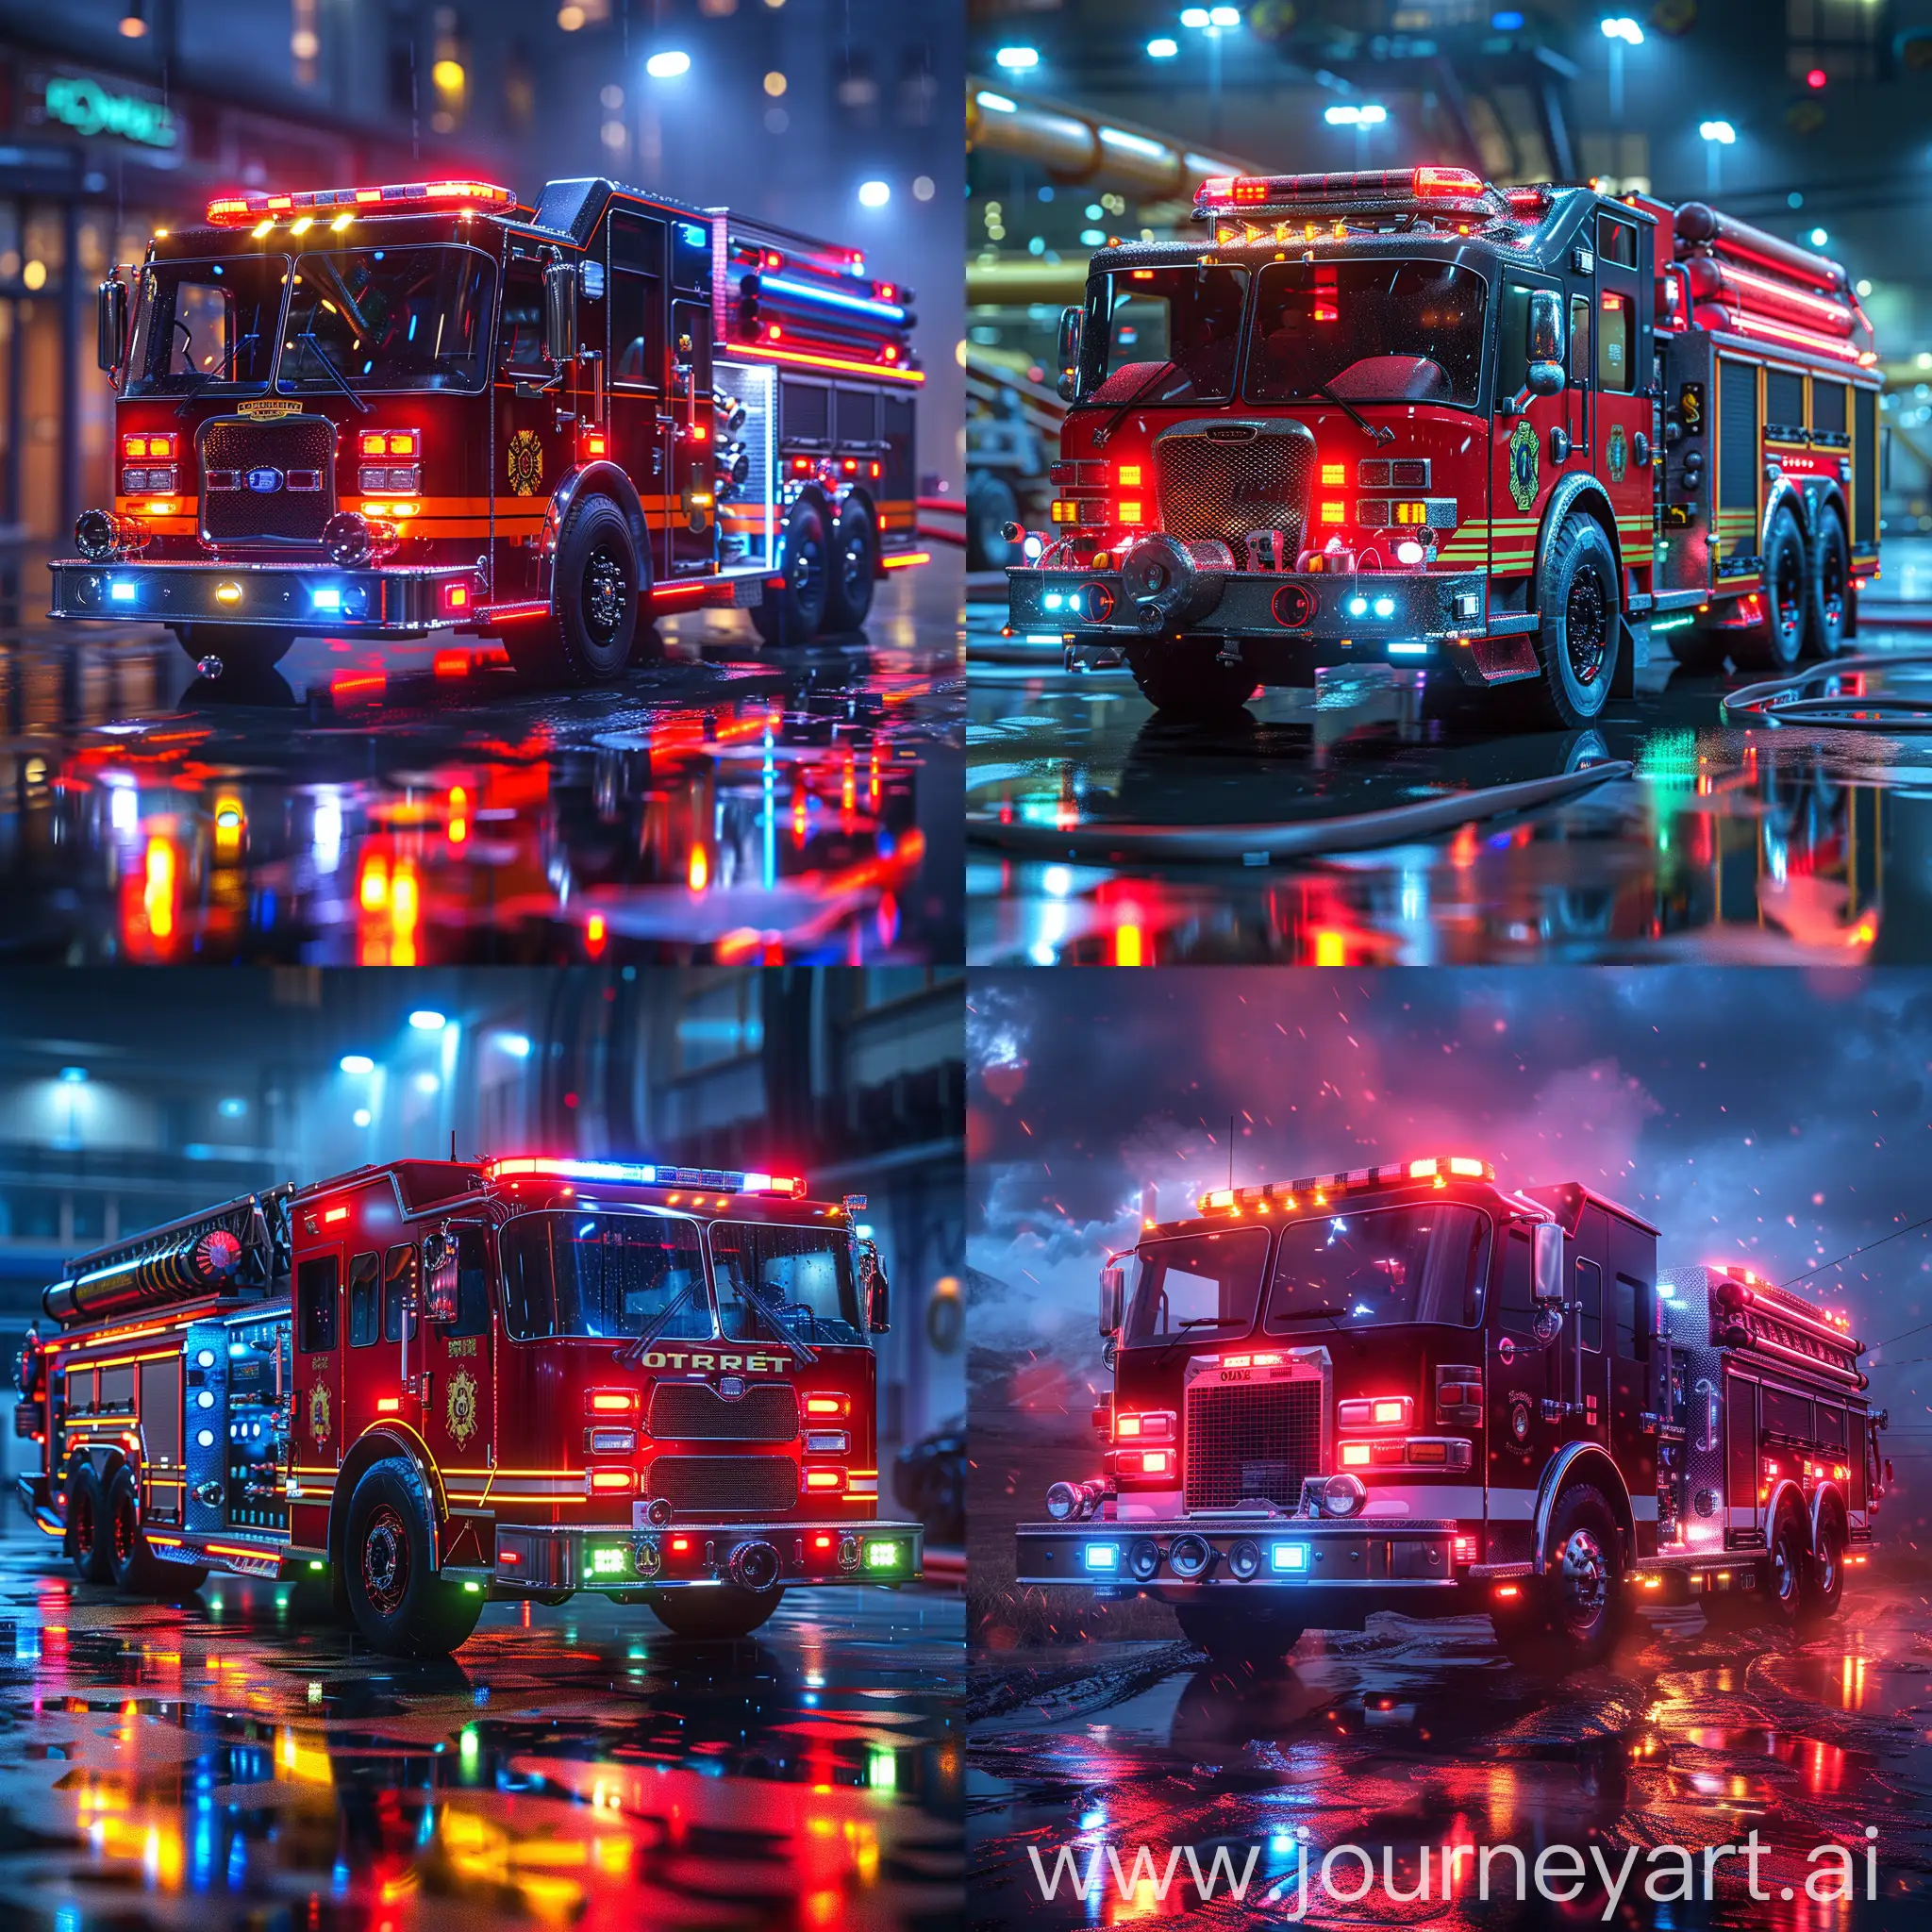 Futuristic-LED-Fire-Truck-in-HighTech-Style